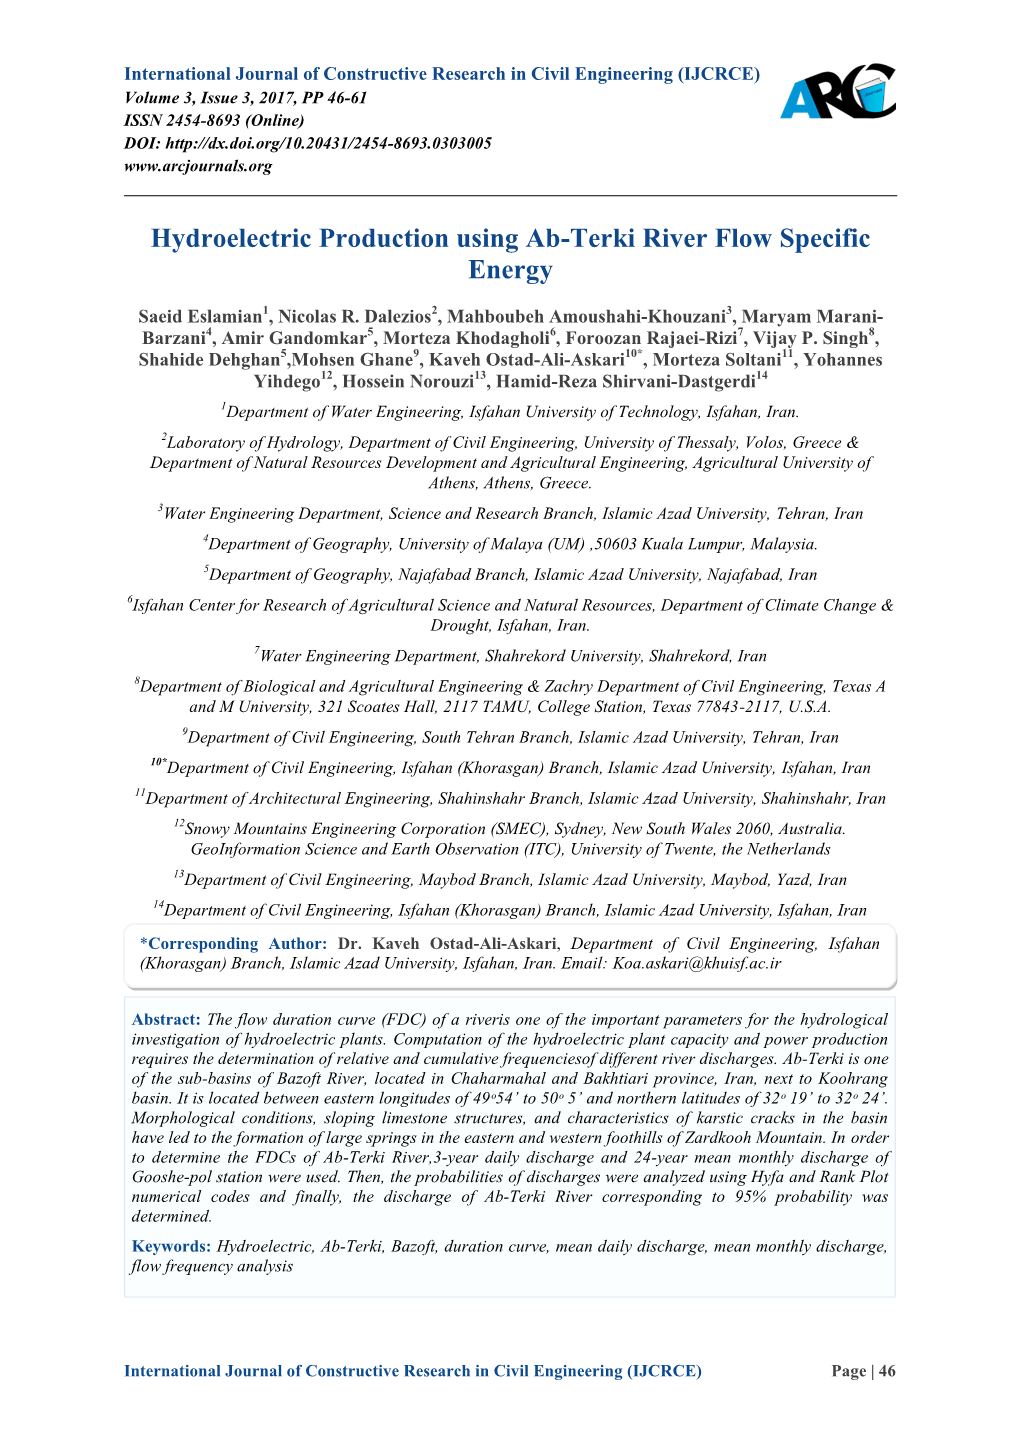 Hydroelectric Production Using Ab-Terki River Flow Specific Energy